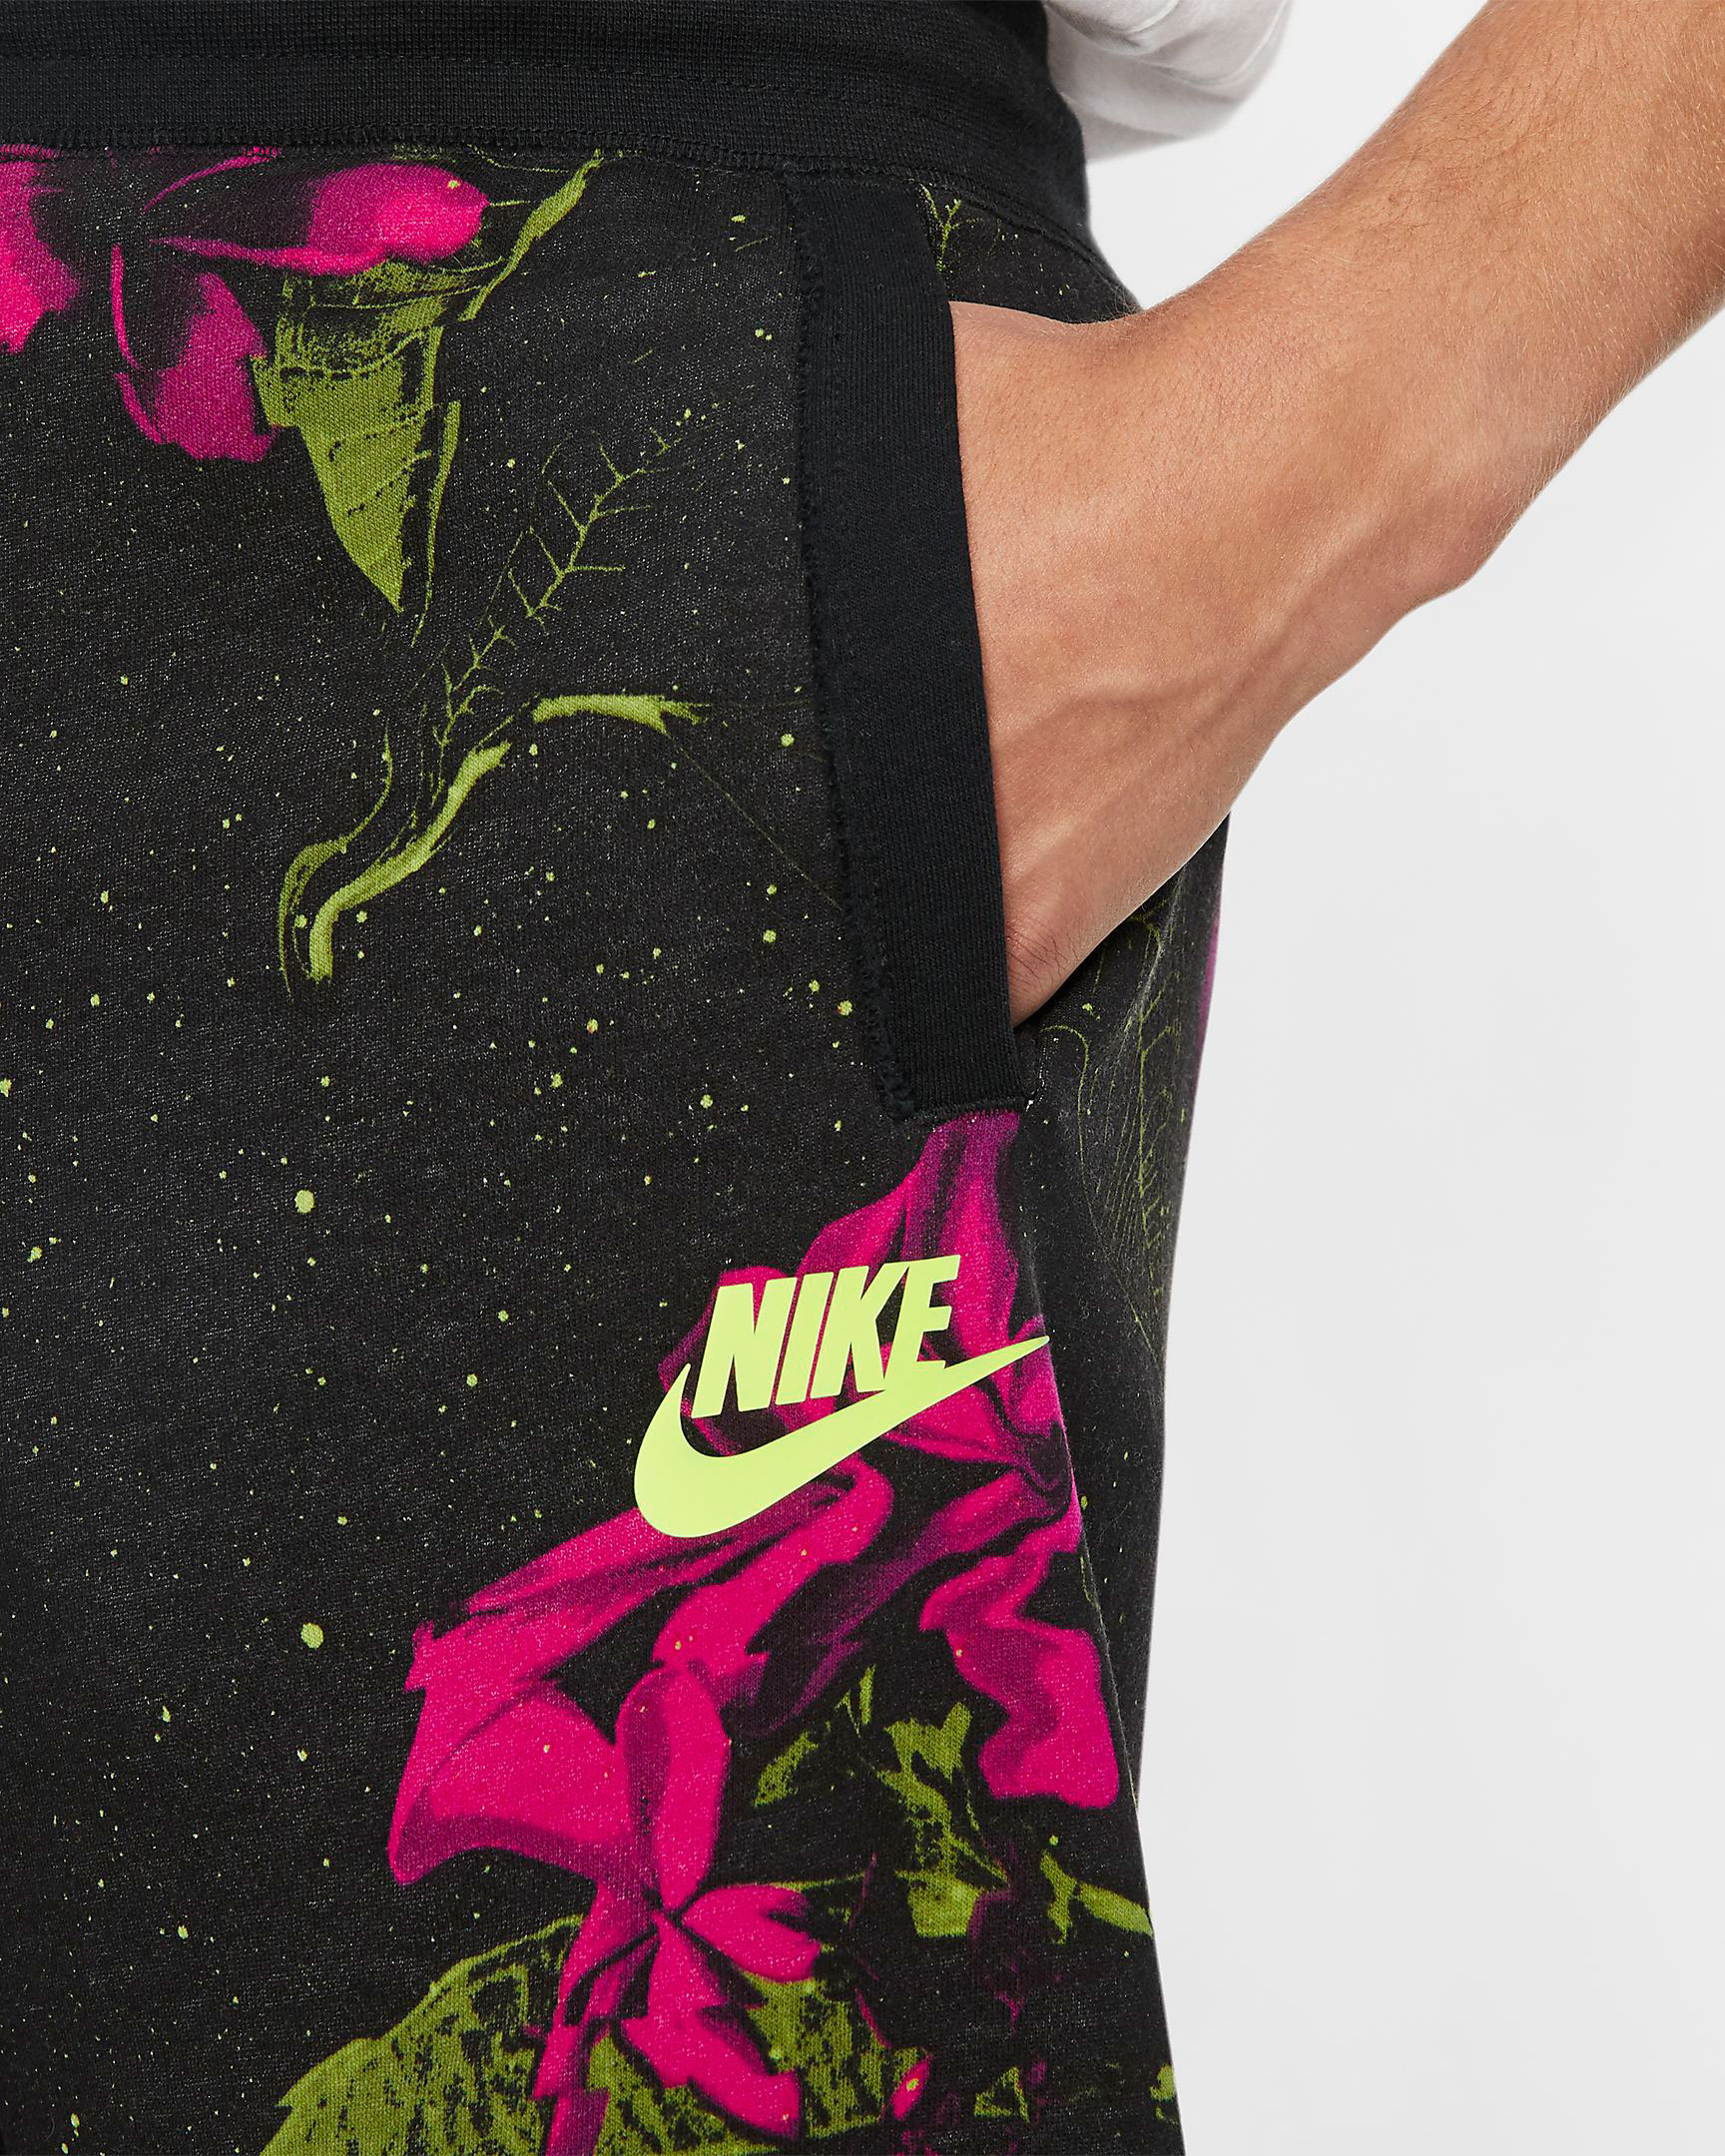 Nike Air Pink Limeaid Shorts and Sneakers | SneakerFits.com